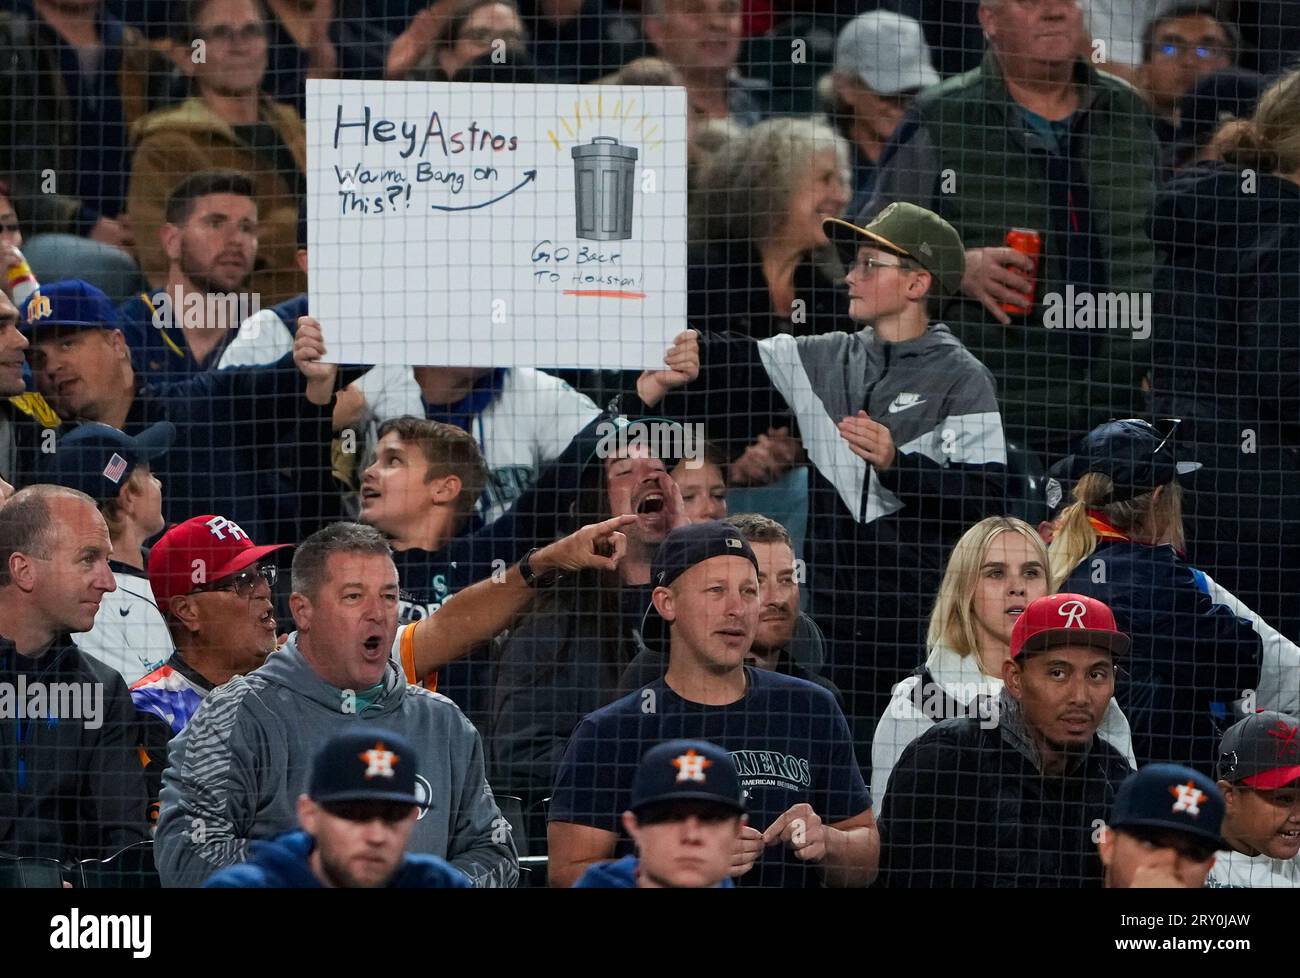 A fan holds a sign referencing the Houston Astros with an image of